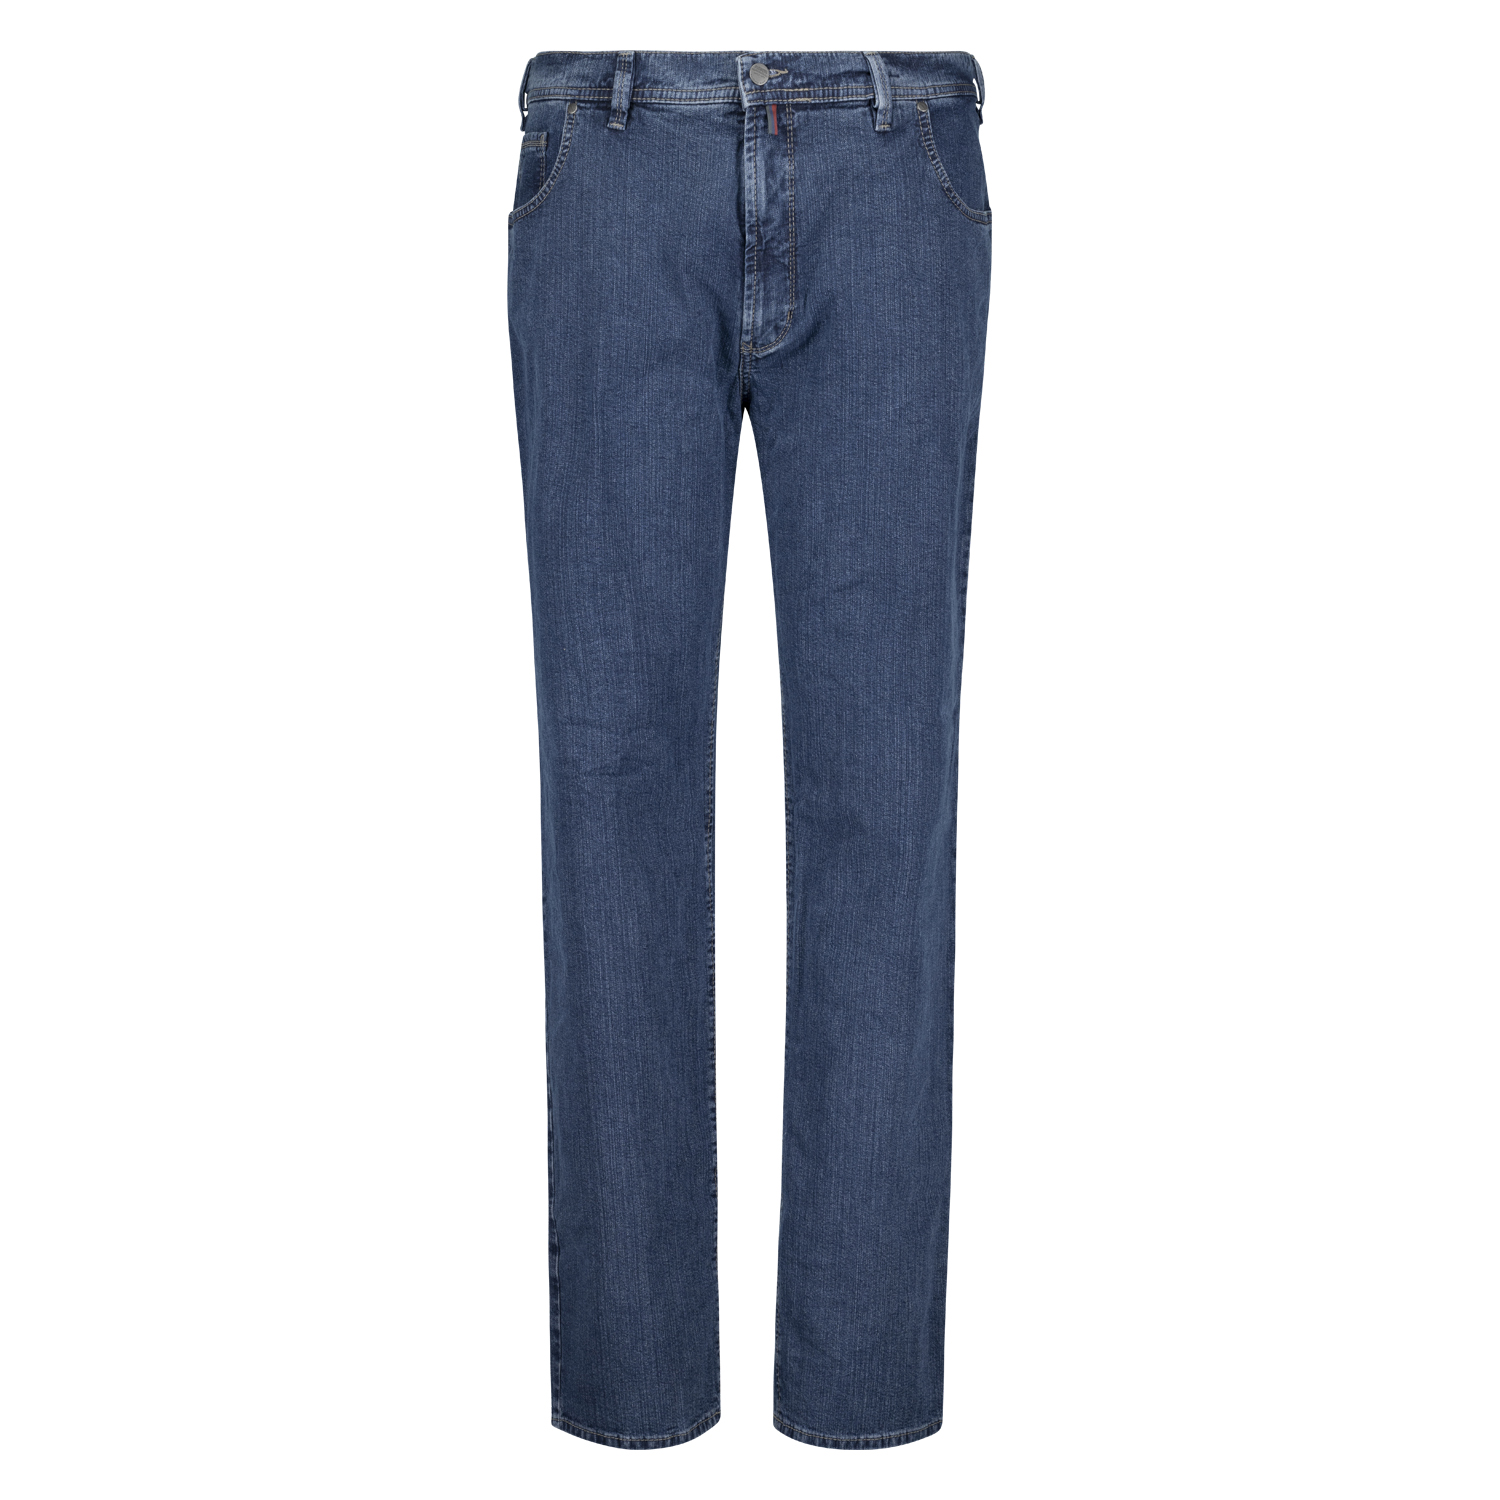 5-Pocket Jeans homme avec stretch "Peter" blue stonewash by Pioneer grandes tailles (Taille haute): 59 - 85